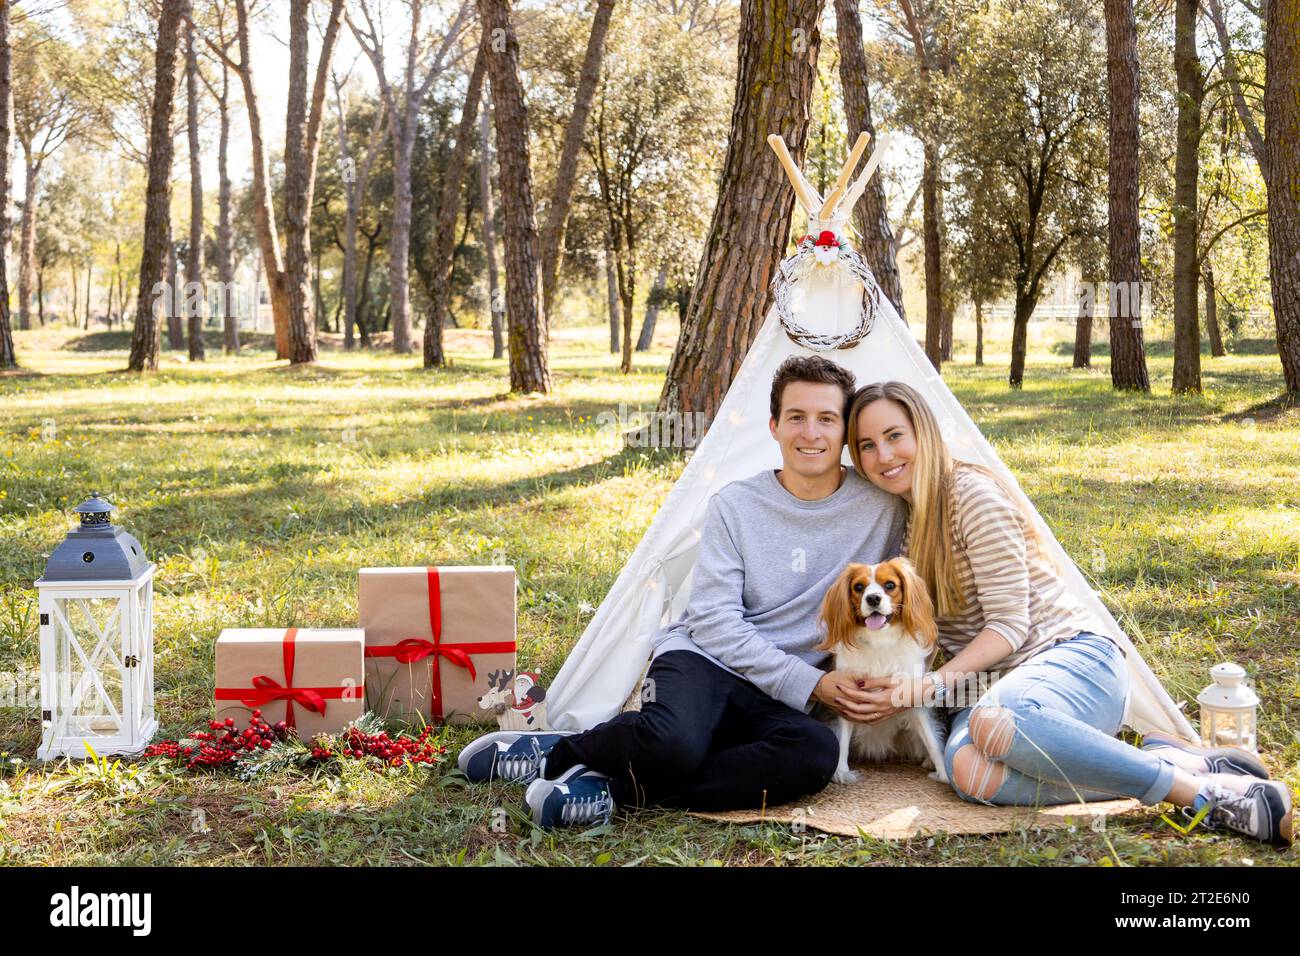 Smiling family of a young couple and a dog posing with Christmas decoration winter in the forest Stock Photo